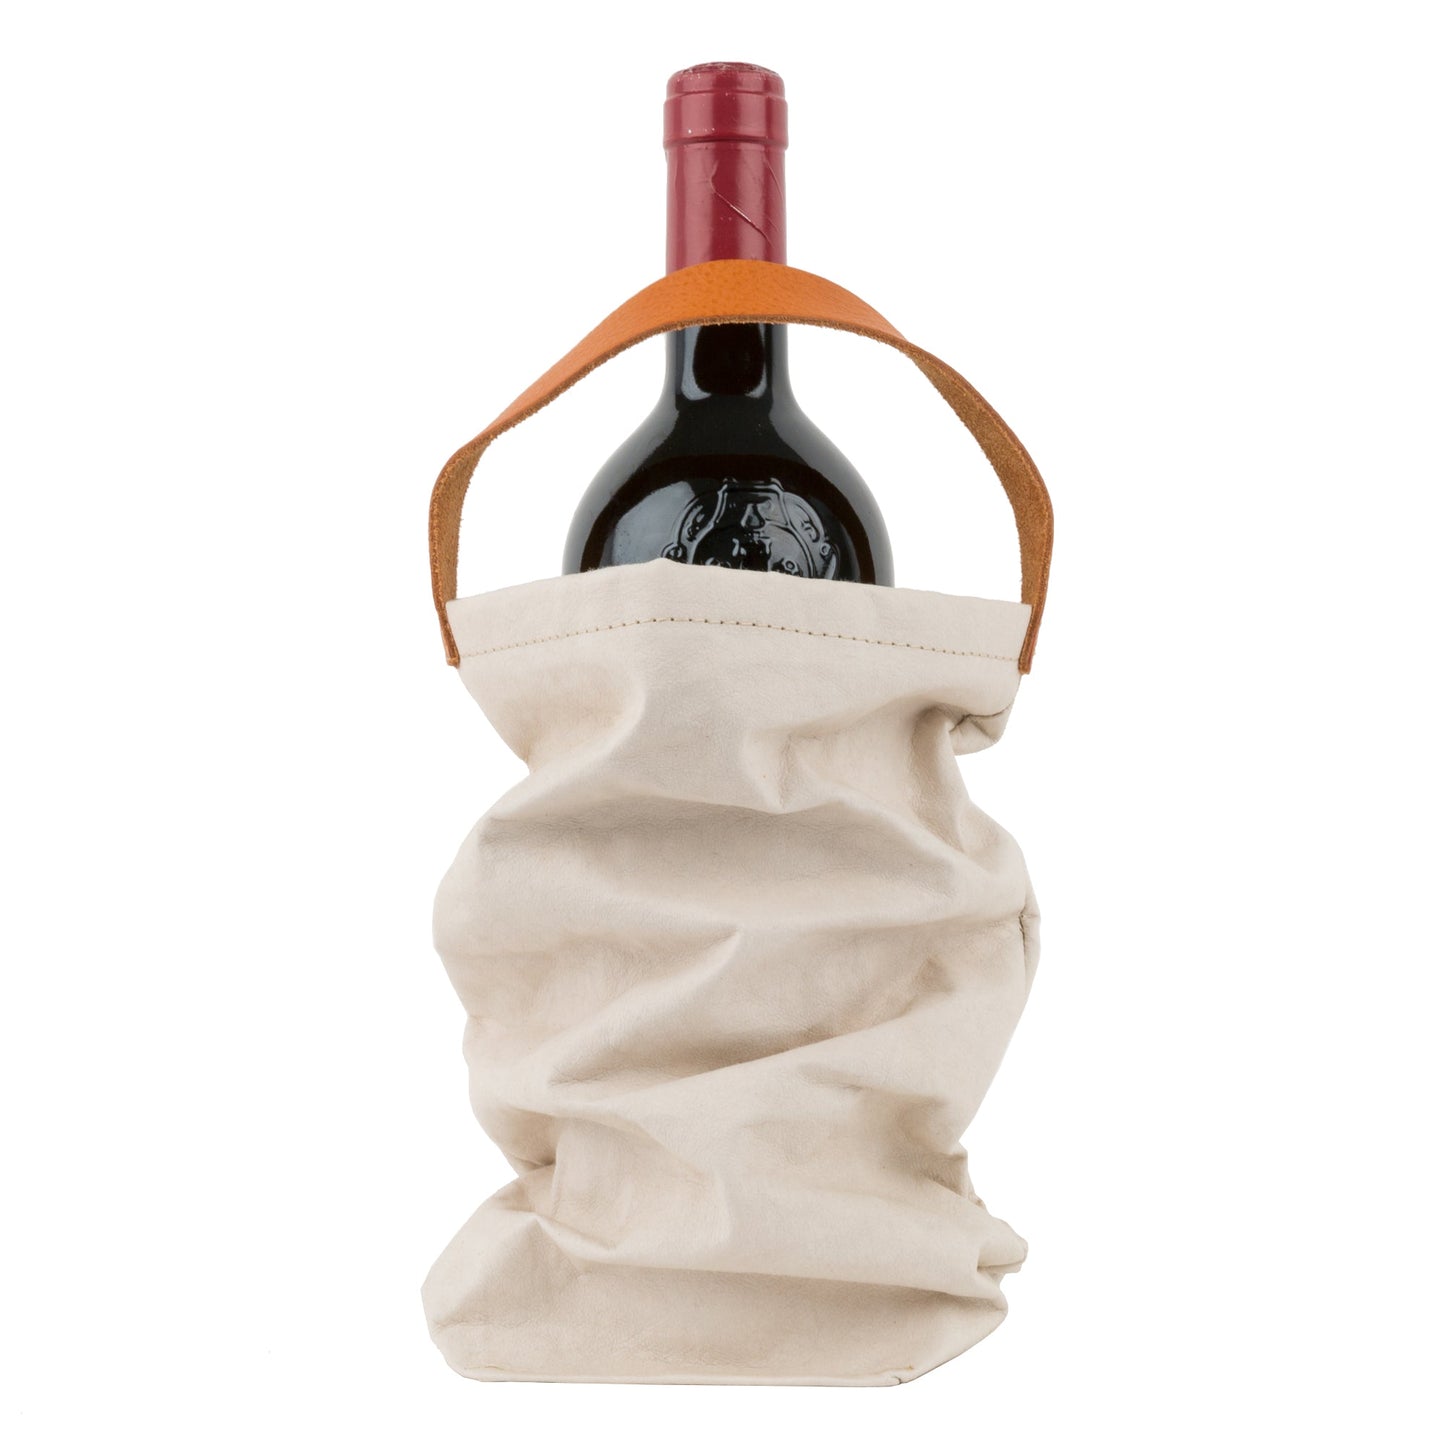 WINE BAG CARRYING TOTE - READY TO SHIP